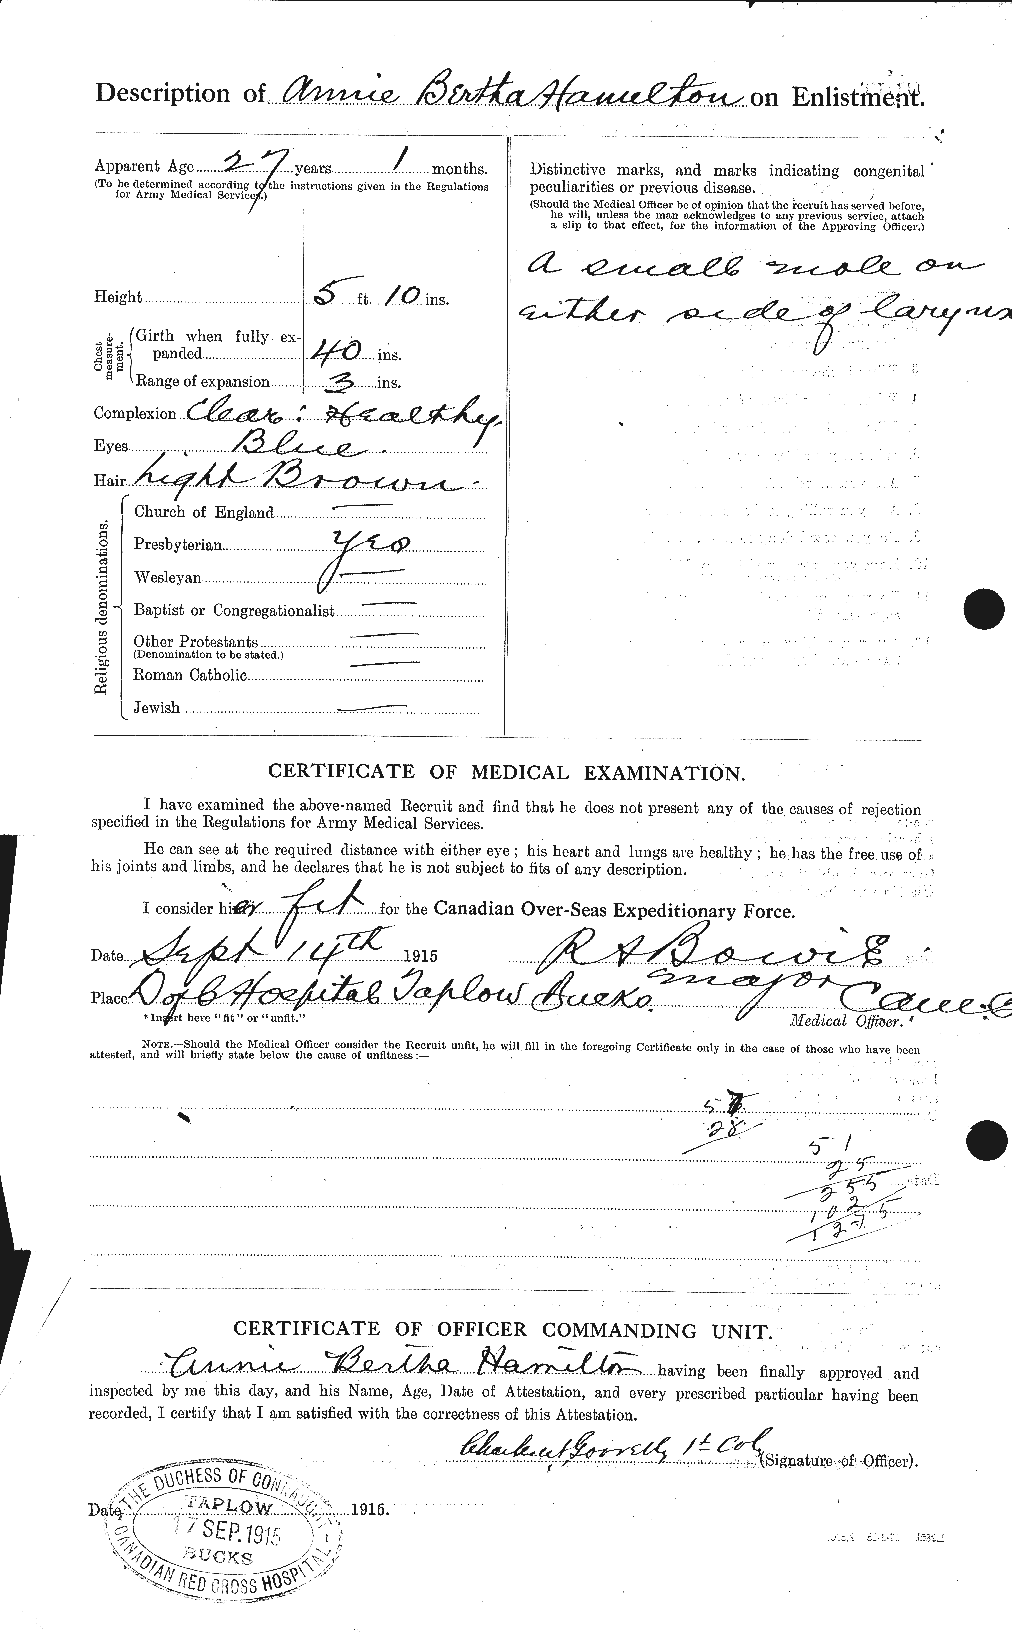 Personnel Records of the First World War - CEF 375241b